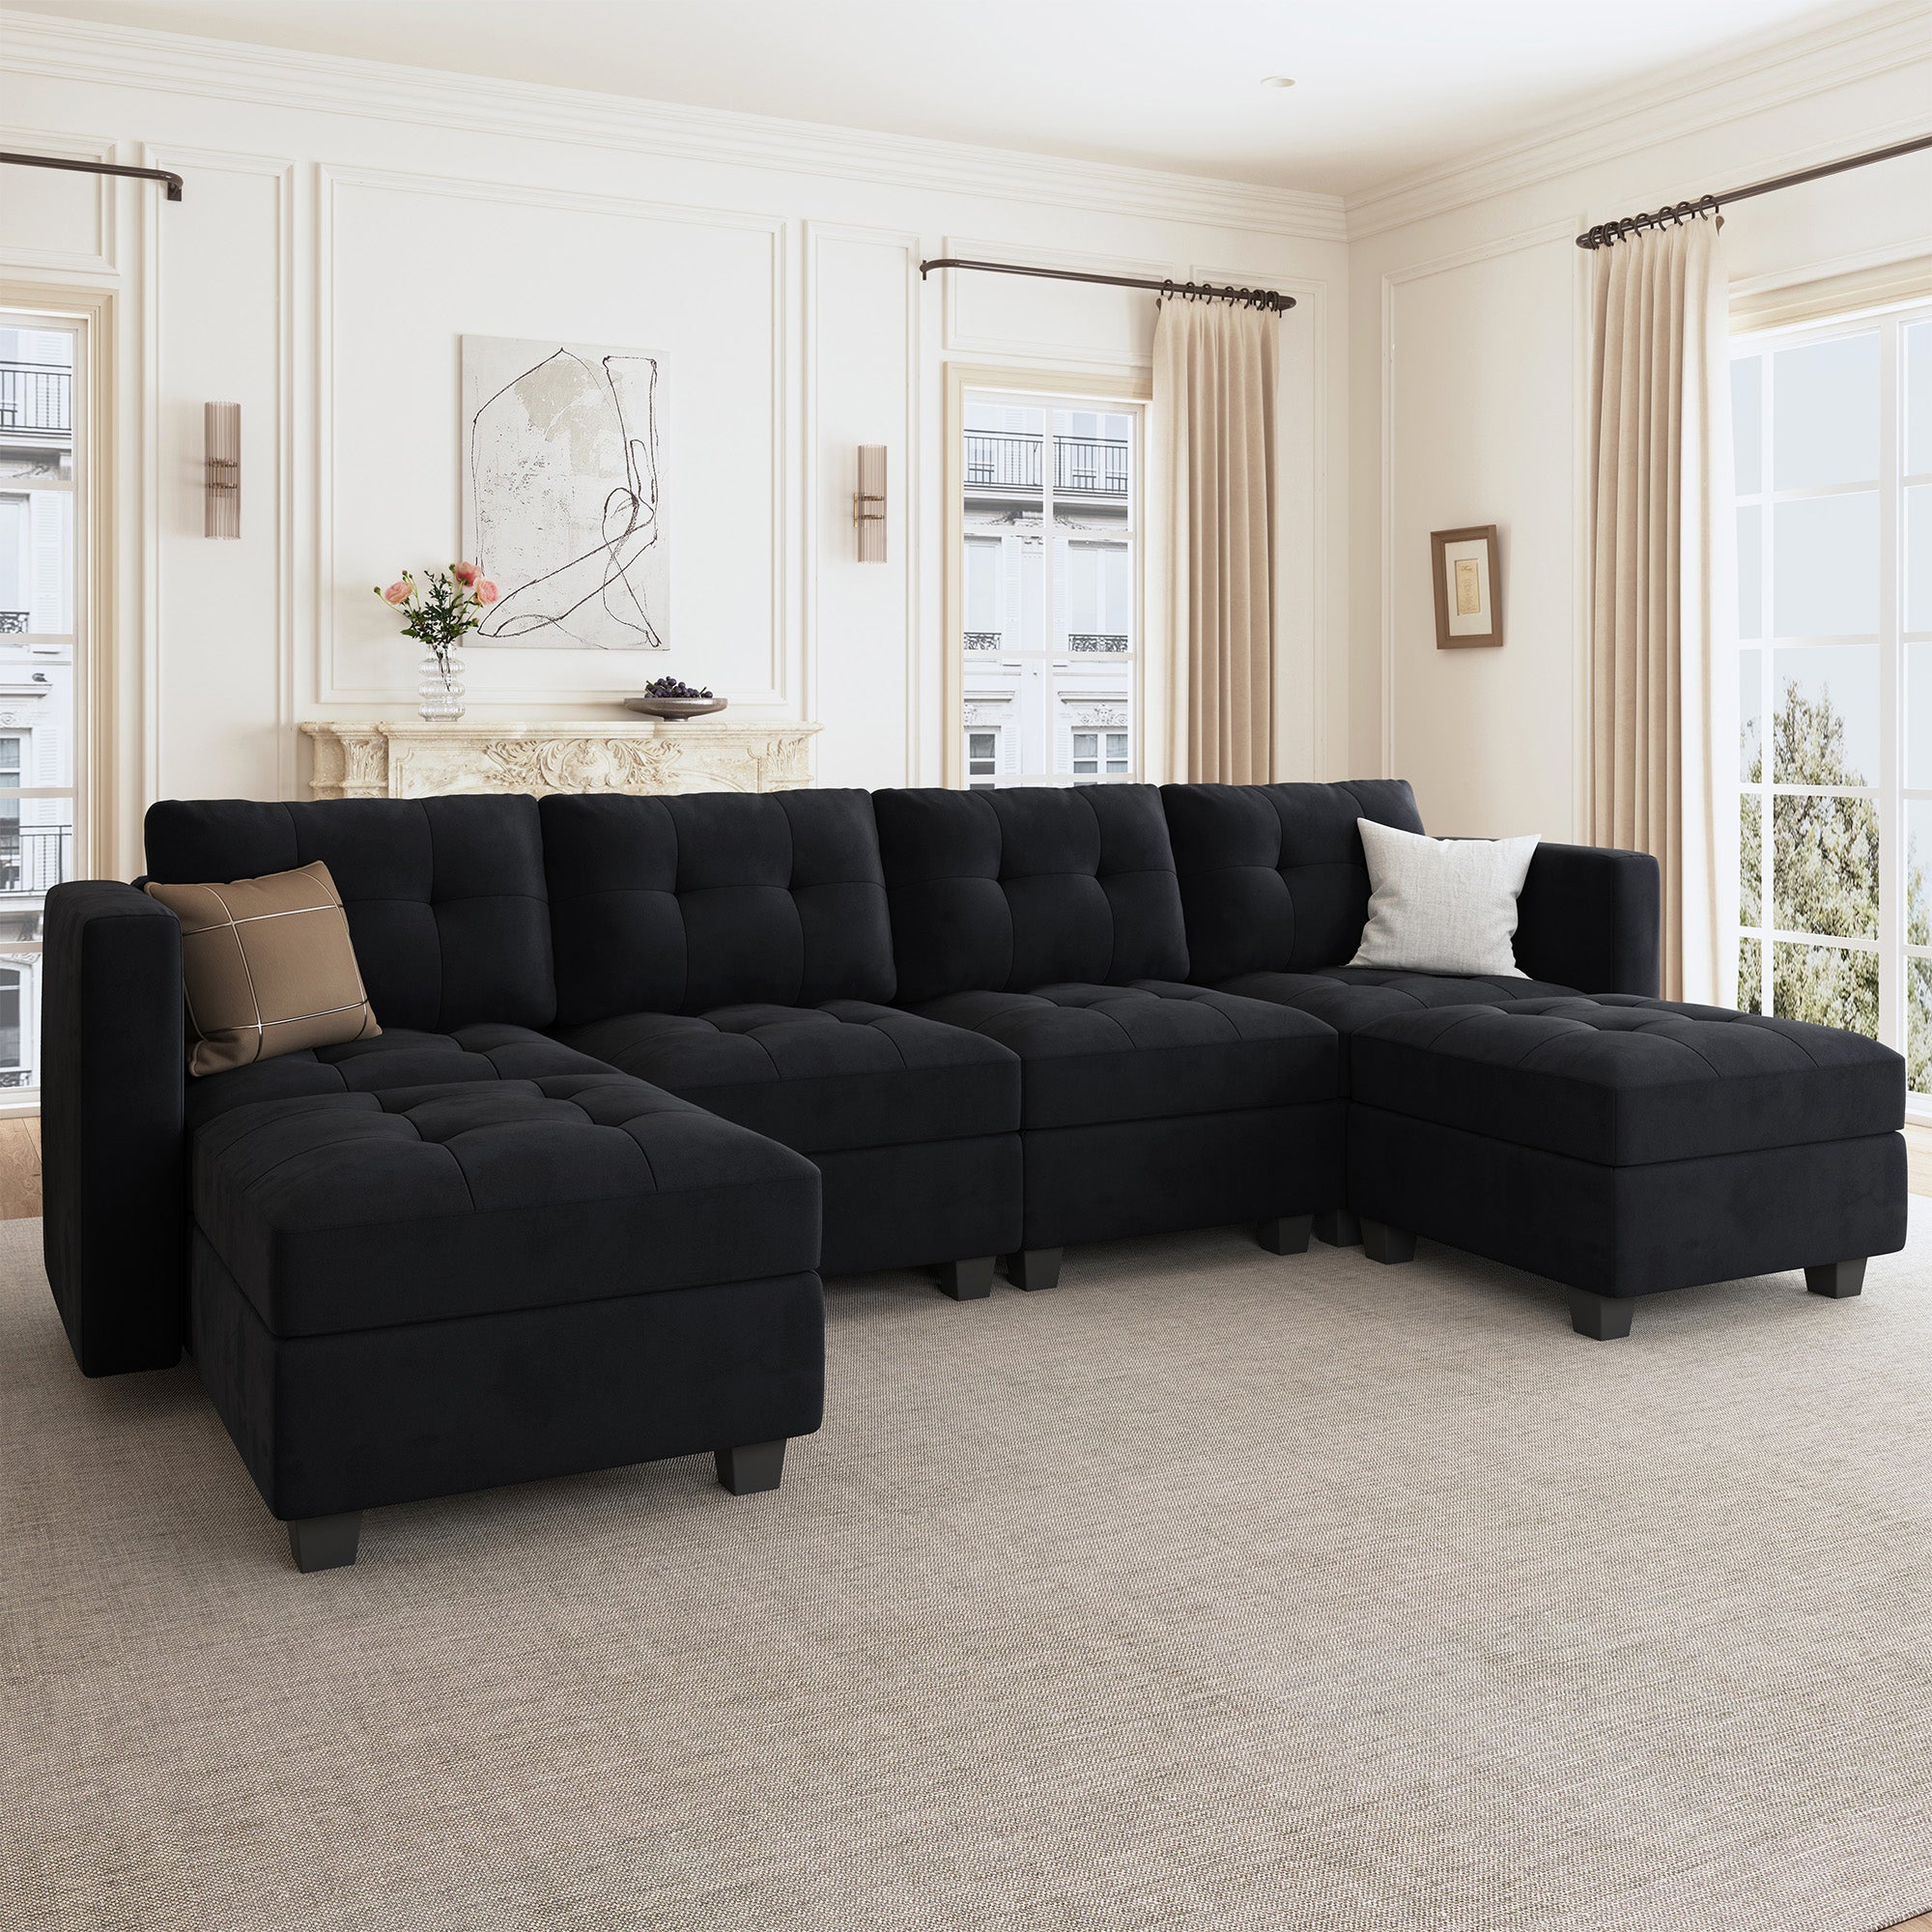 HONBAY Tufted Modular Sofa 4-Seat+1-Side Armrest+2-Ottoman with Storage Seater